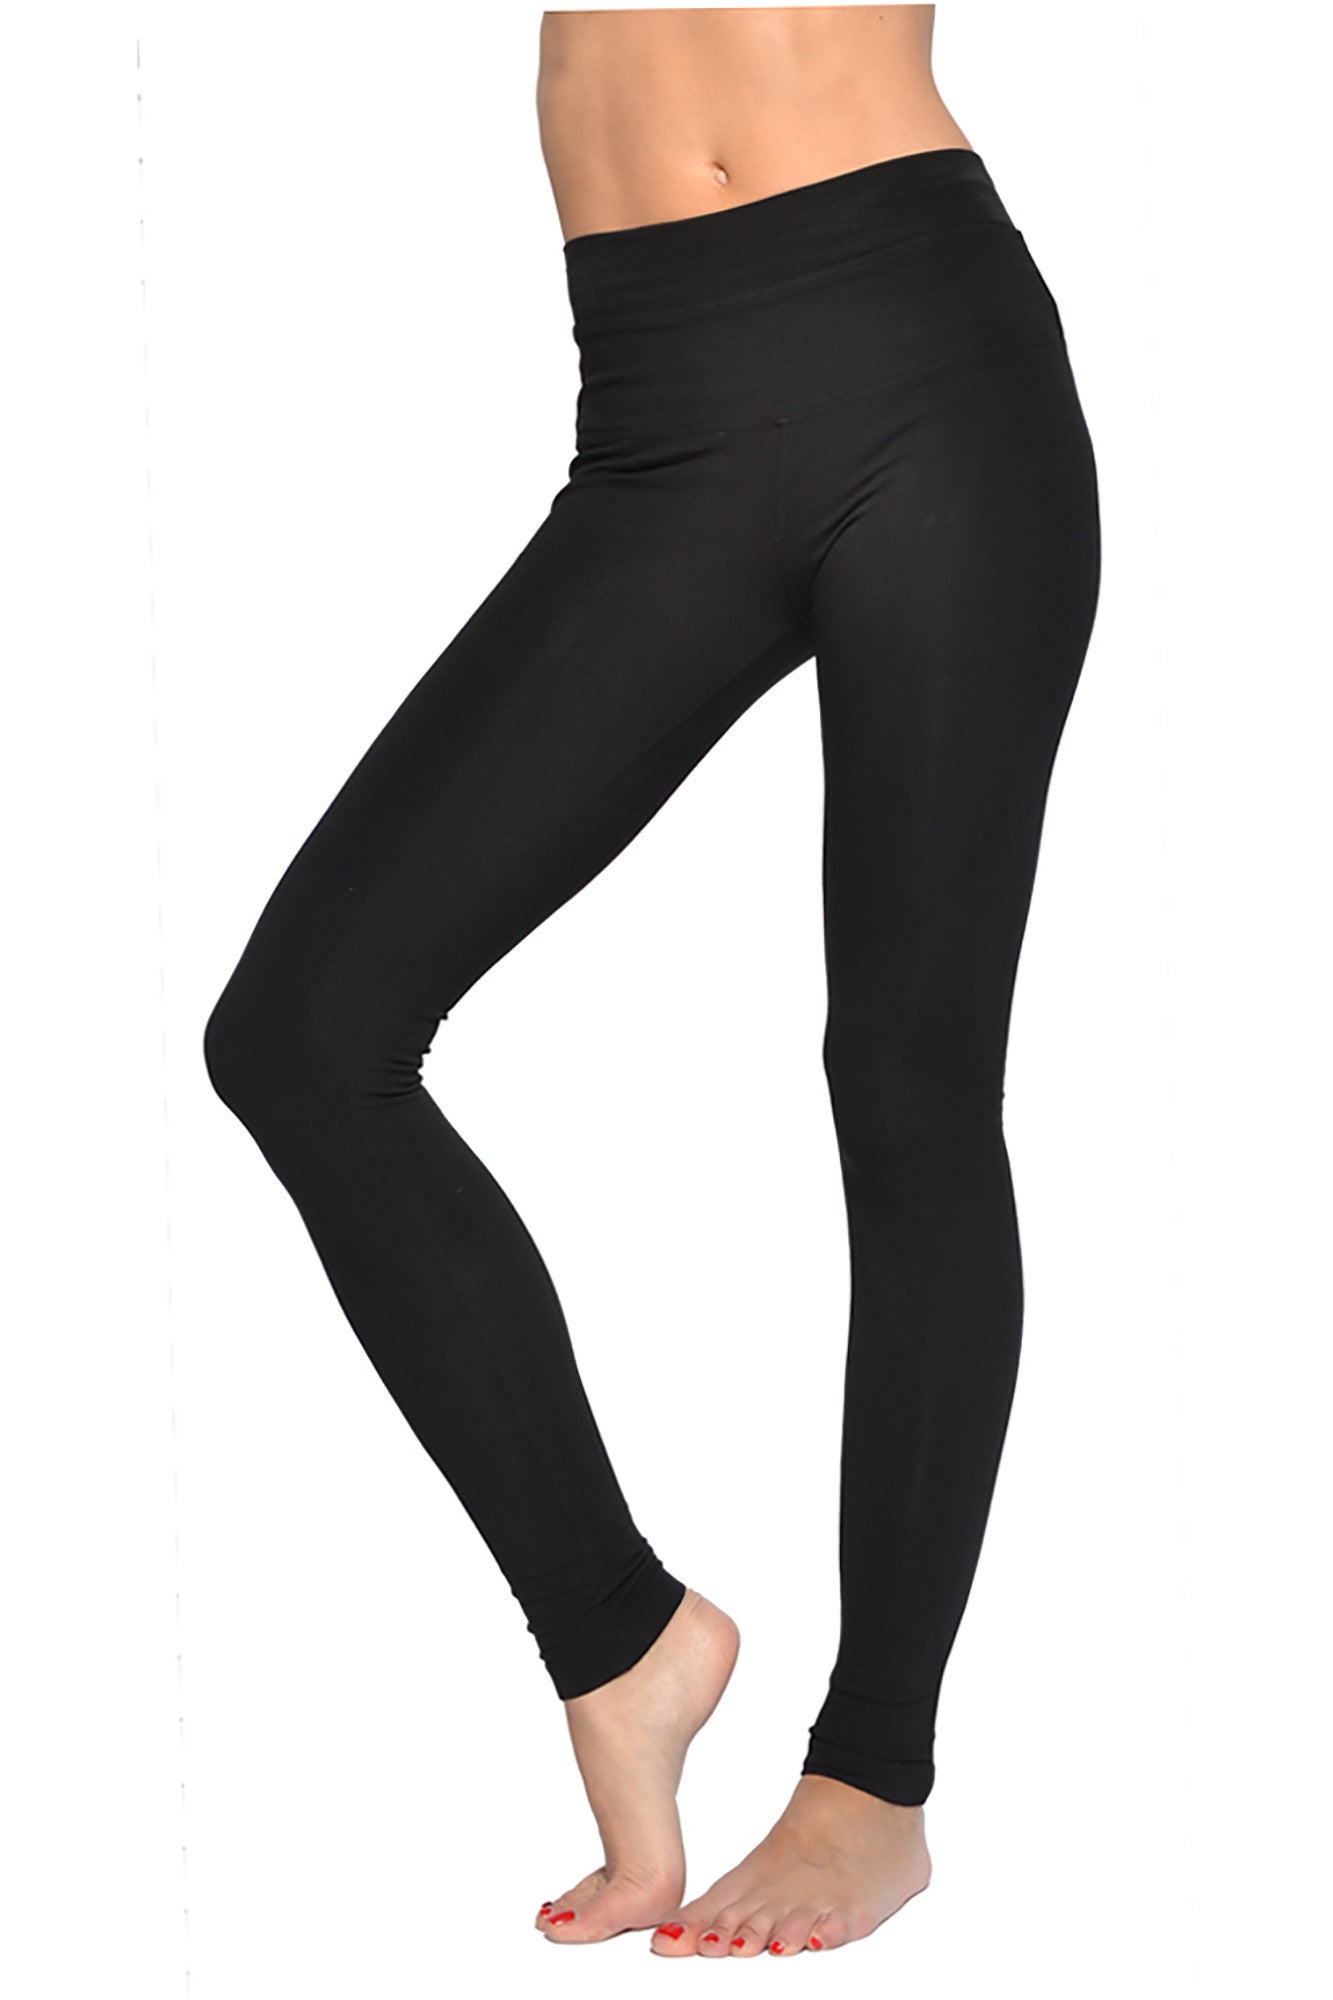 Hard Tail Forever Low Rise Ankle Legging - Charcoal Heather Gray